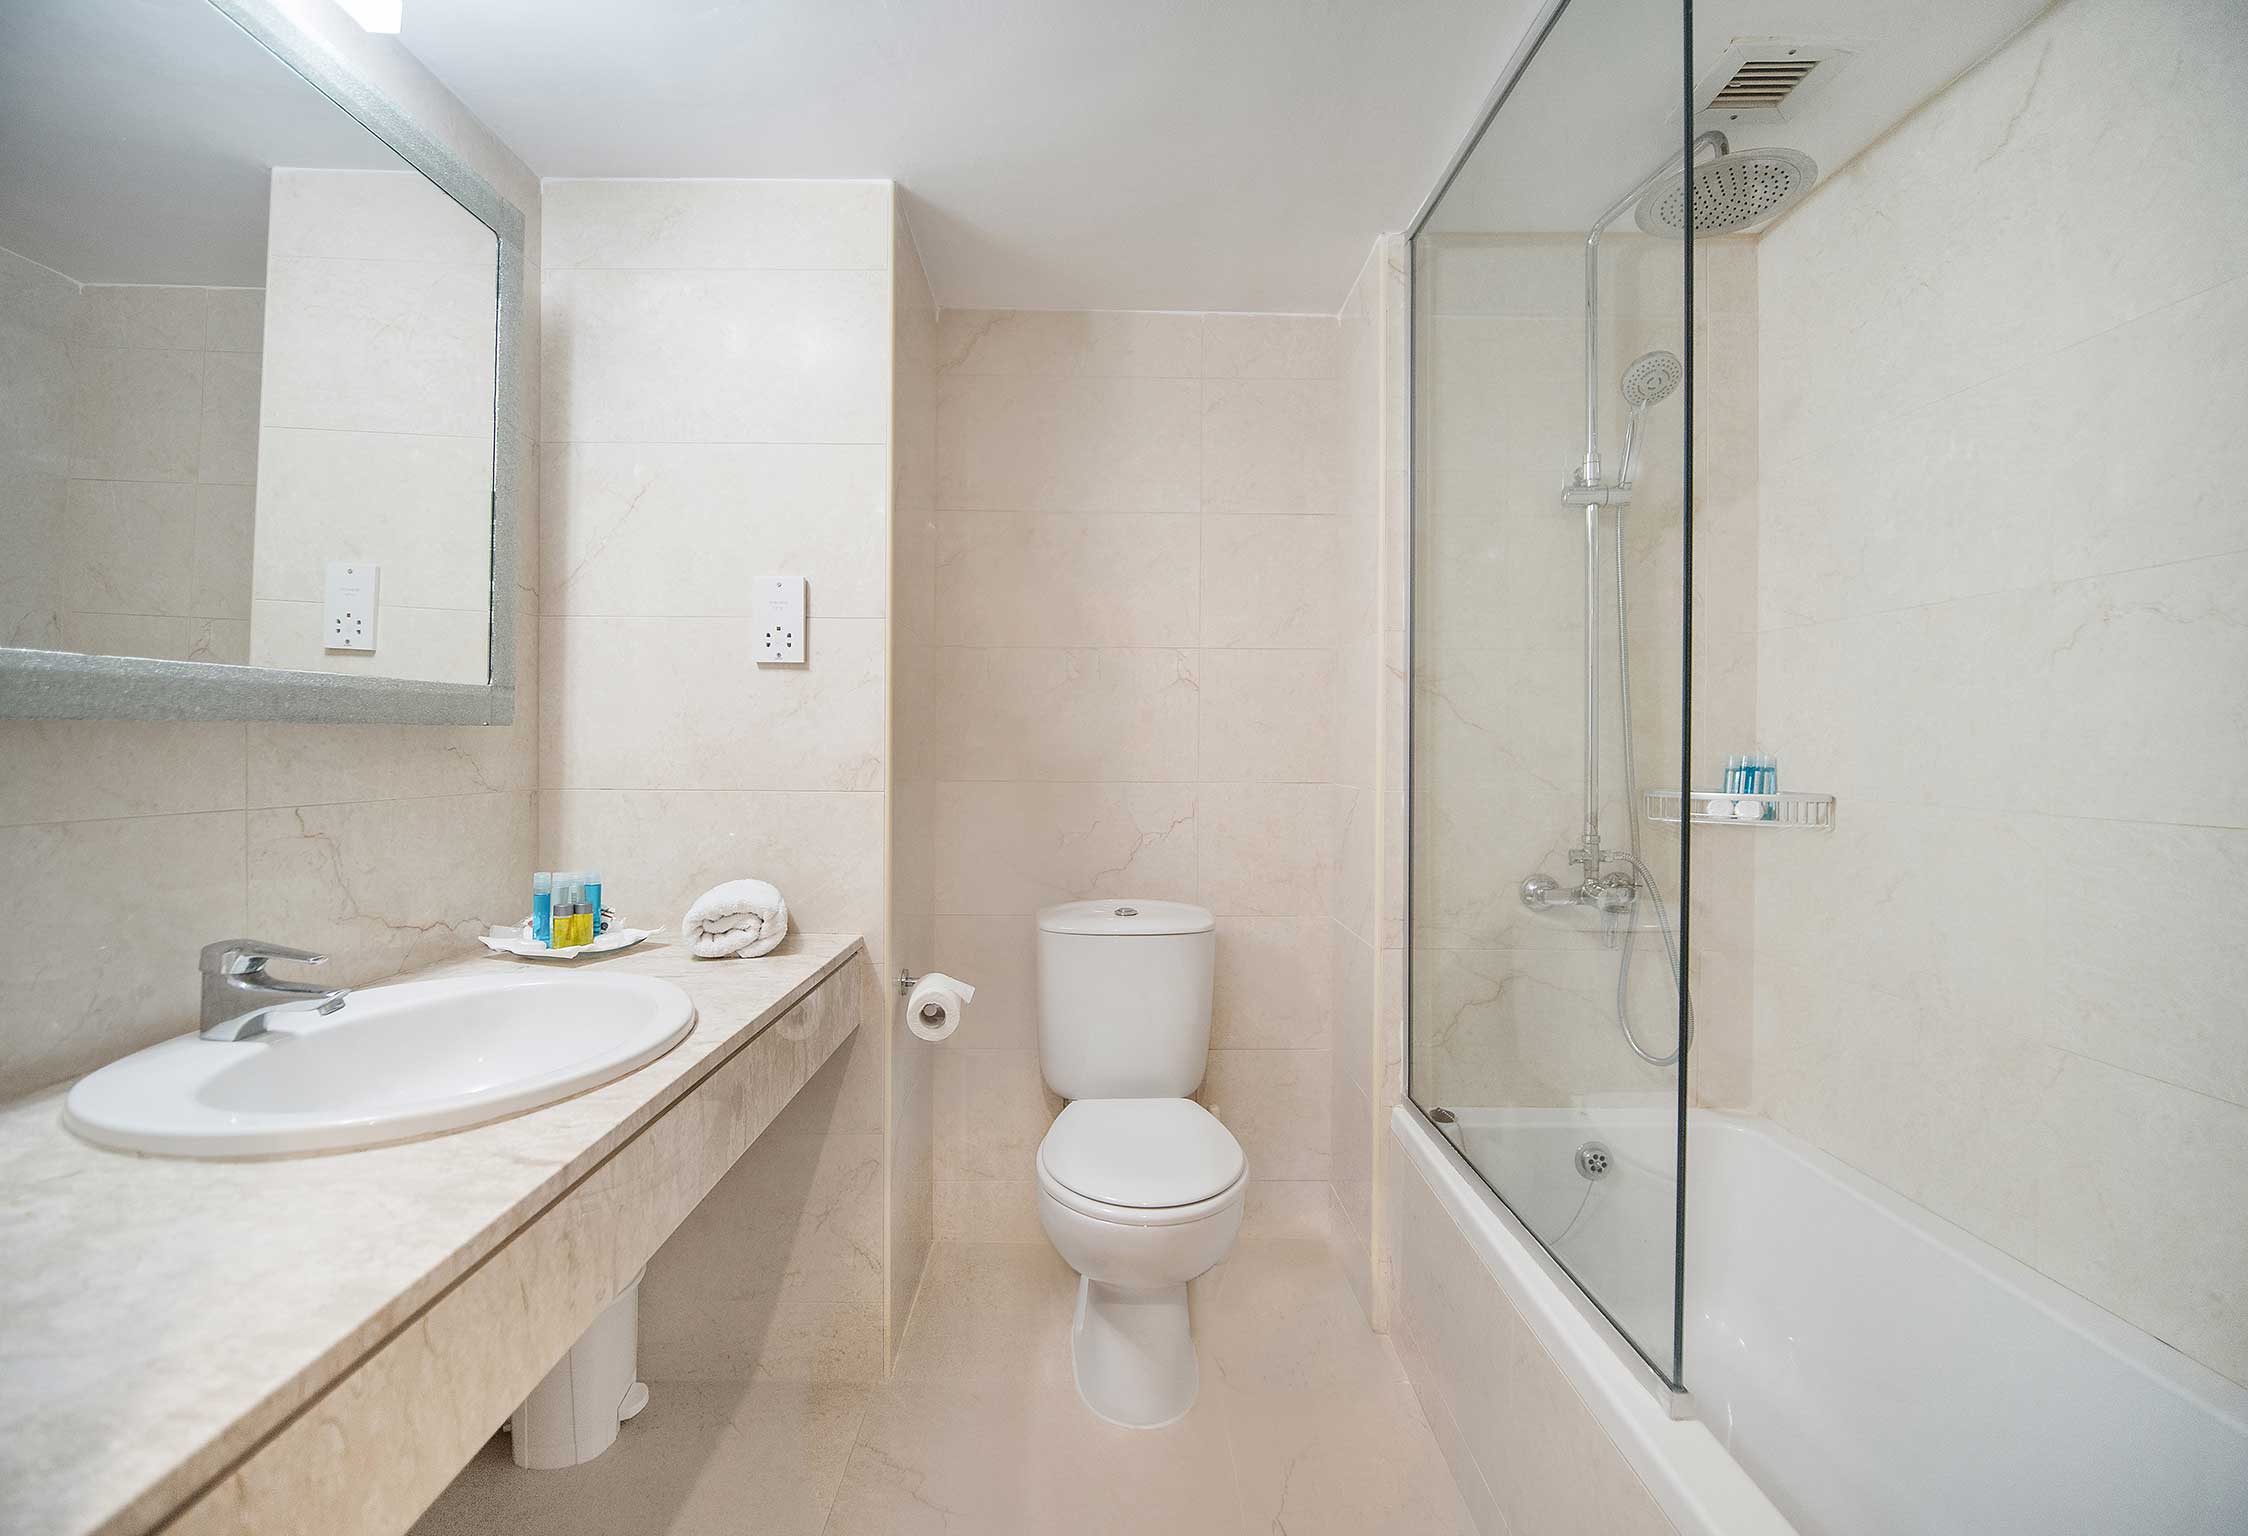 Bathroom at Avilda Hotel in Paphos with sink, mirror, toilet, bath tub and shower